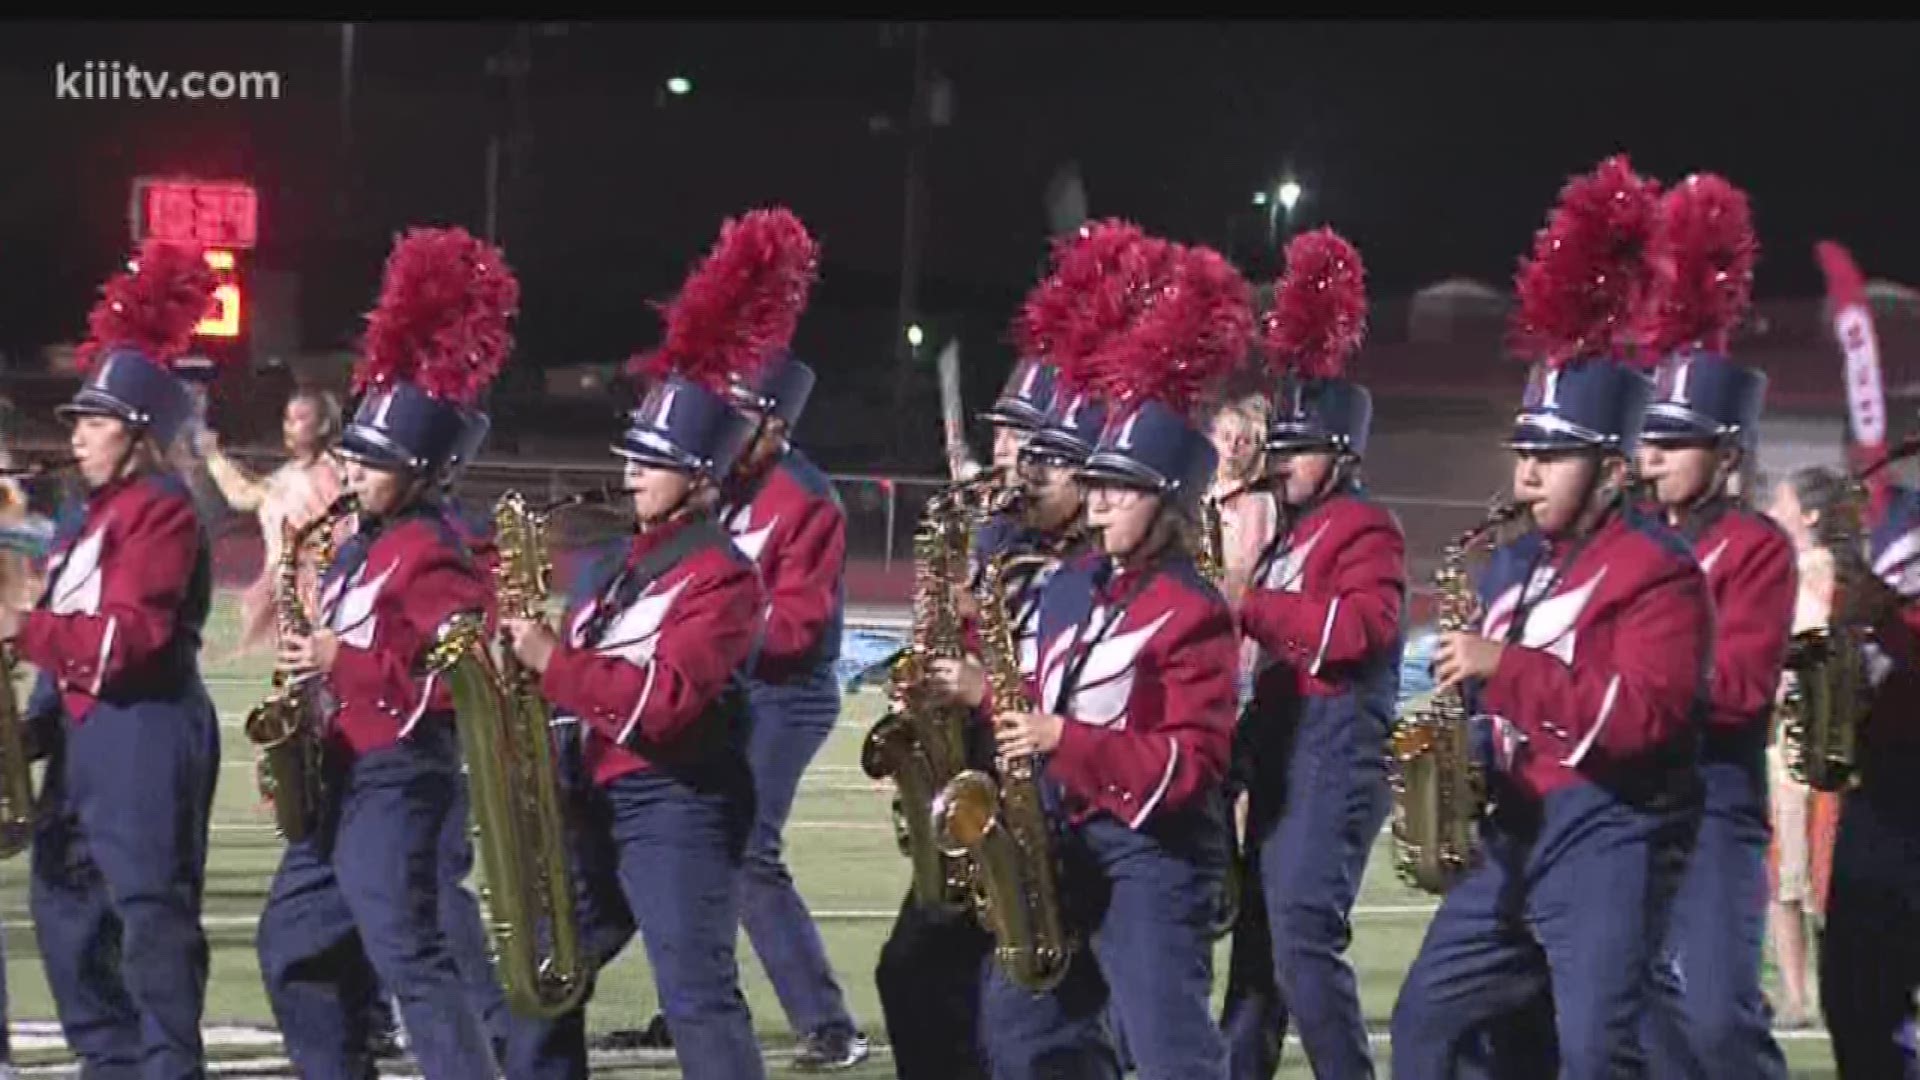 C block includes highlights of:
- Monte Alto's 19-6 win over Premont
- Rockport-Fulton's 33-16 win over Aransas Pass
- Hebbronville's 68-14 win over Freer
- Veterans Memorial Marching Band halftime performance